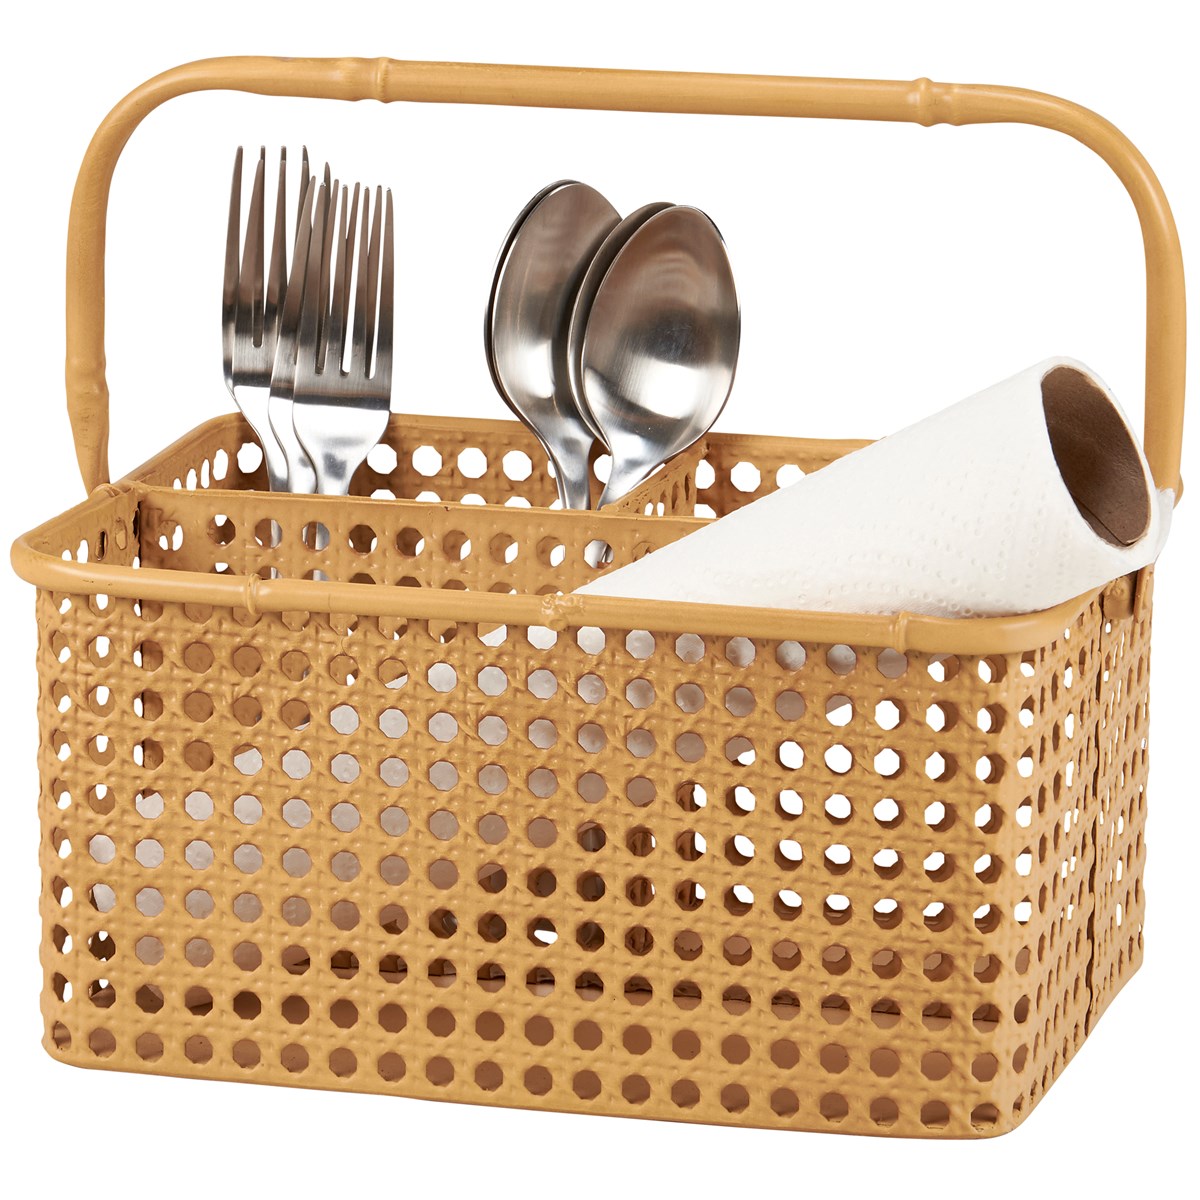 Cane Weave Caddy - Metal